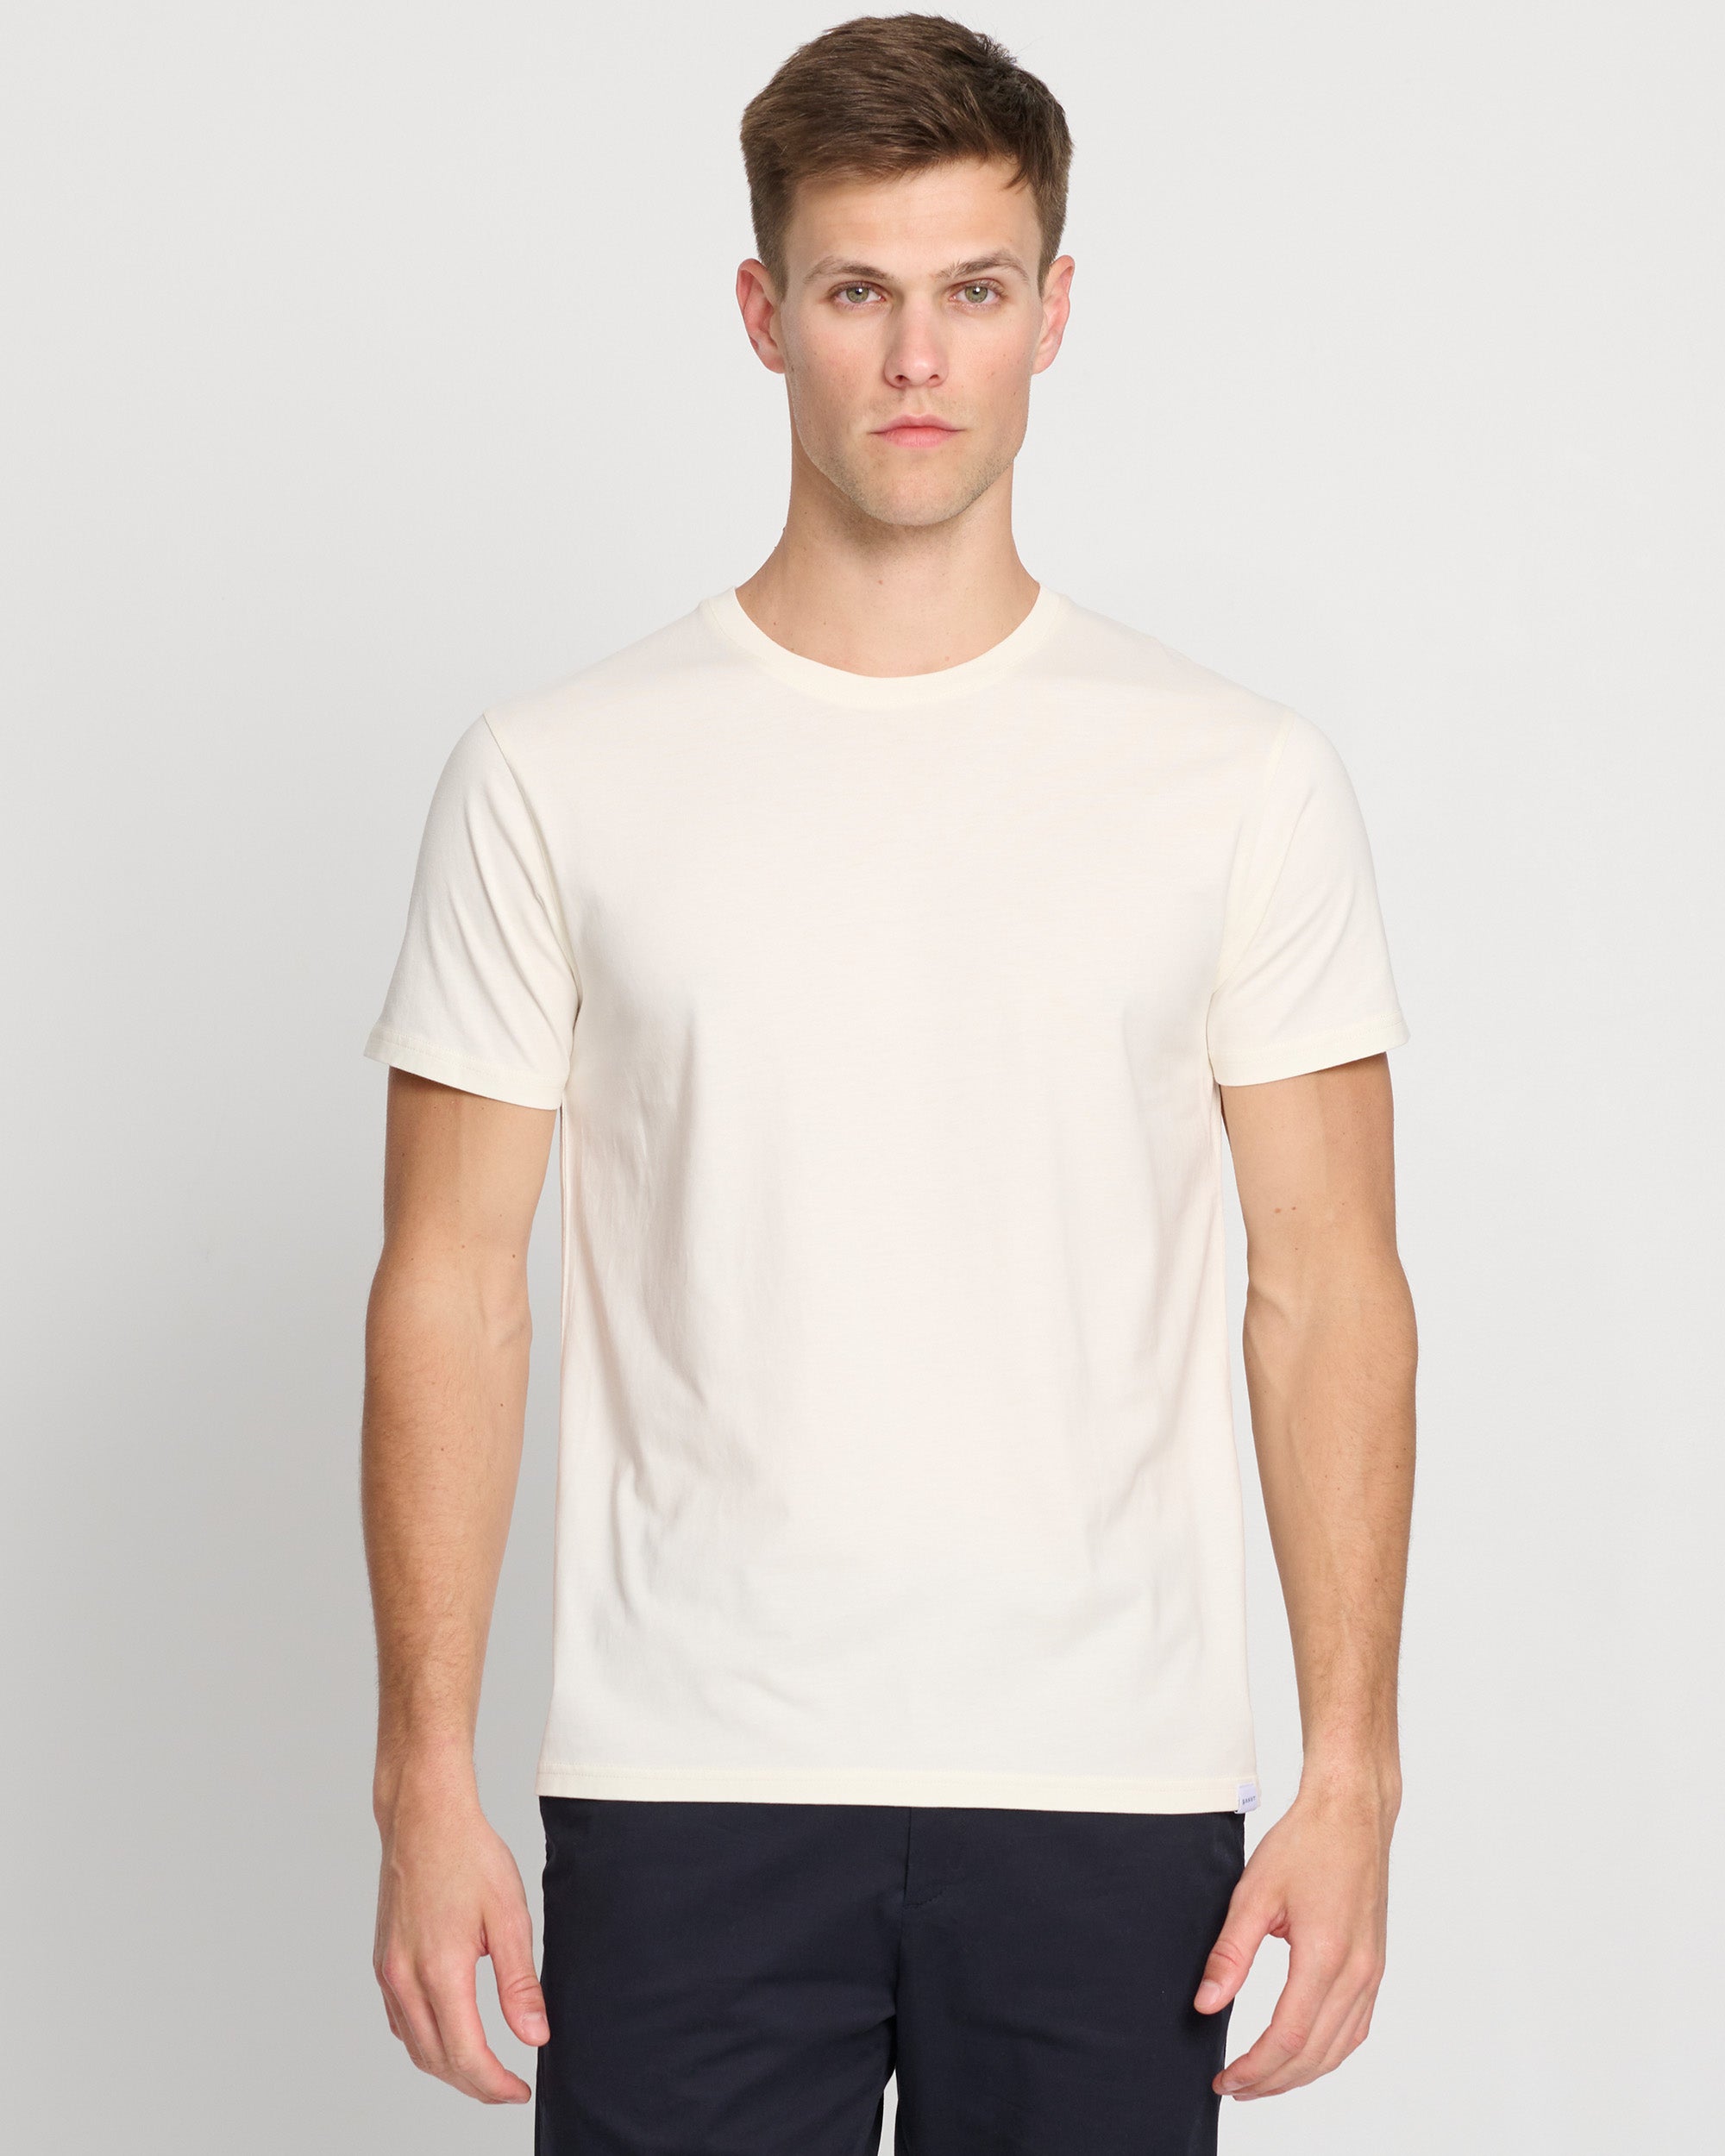 for 185GSM The Premium Off-White T-Shirt Cotton Men | Perfect